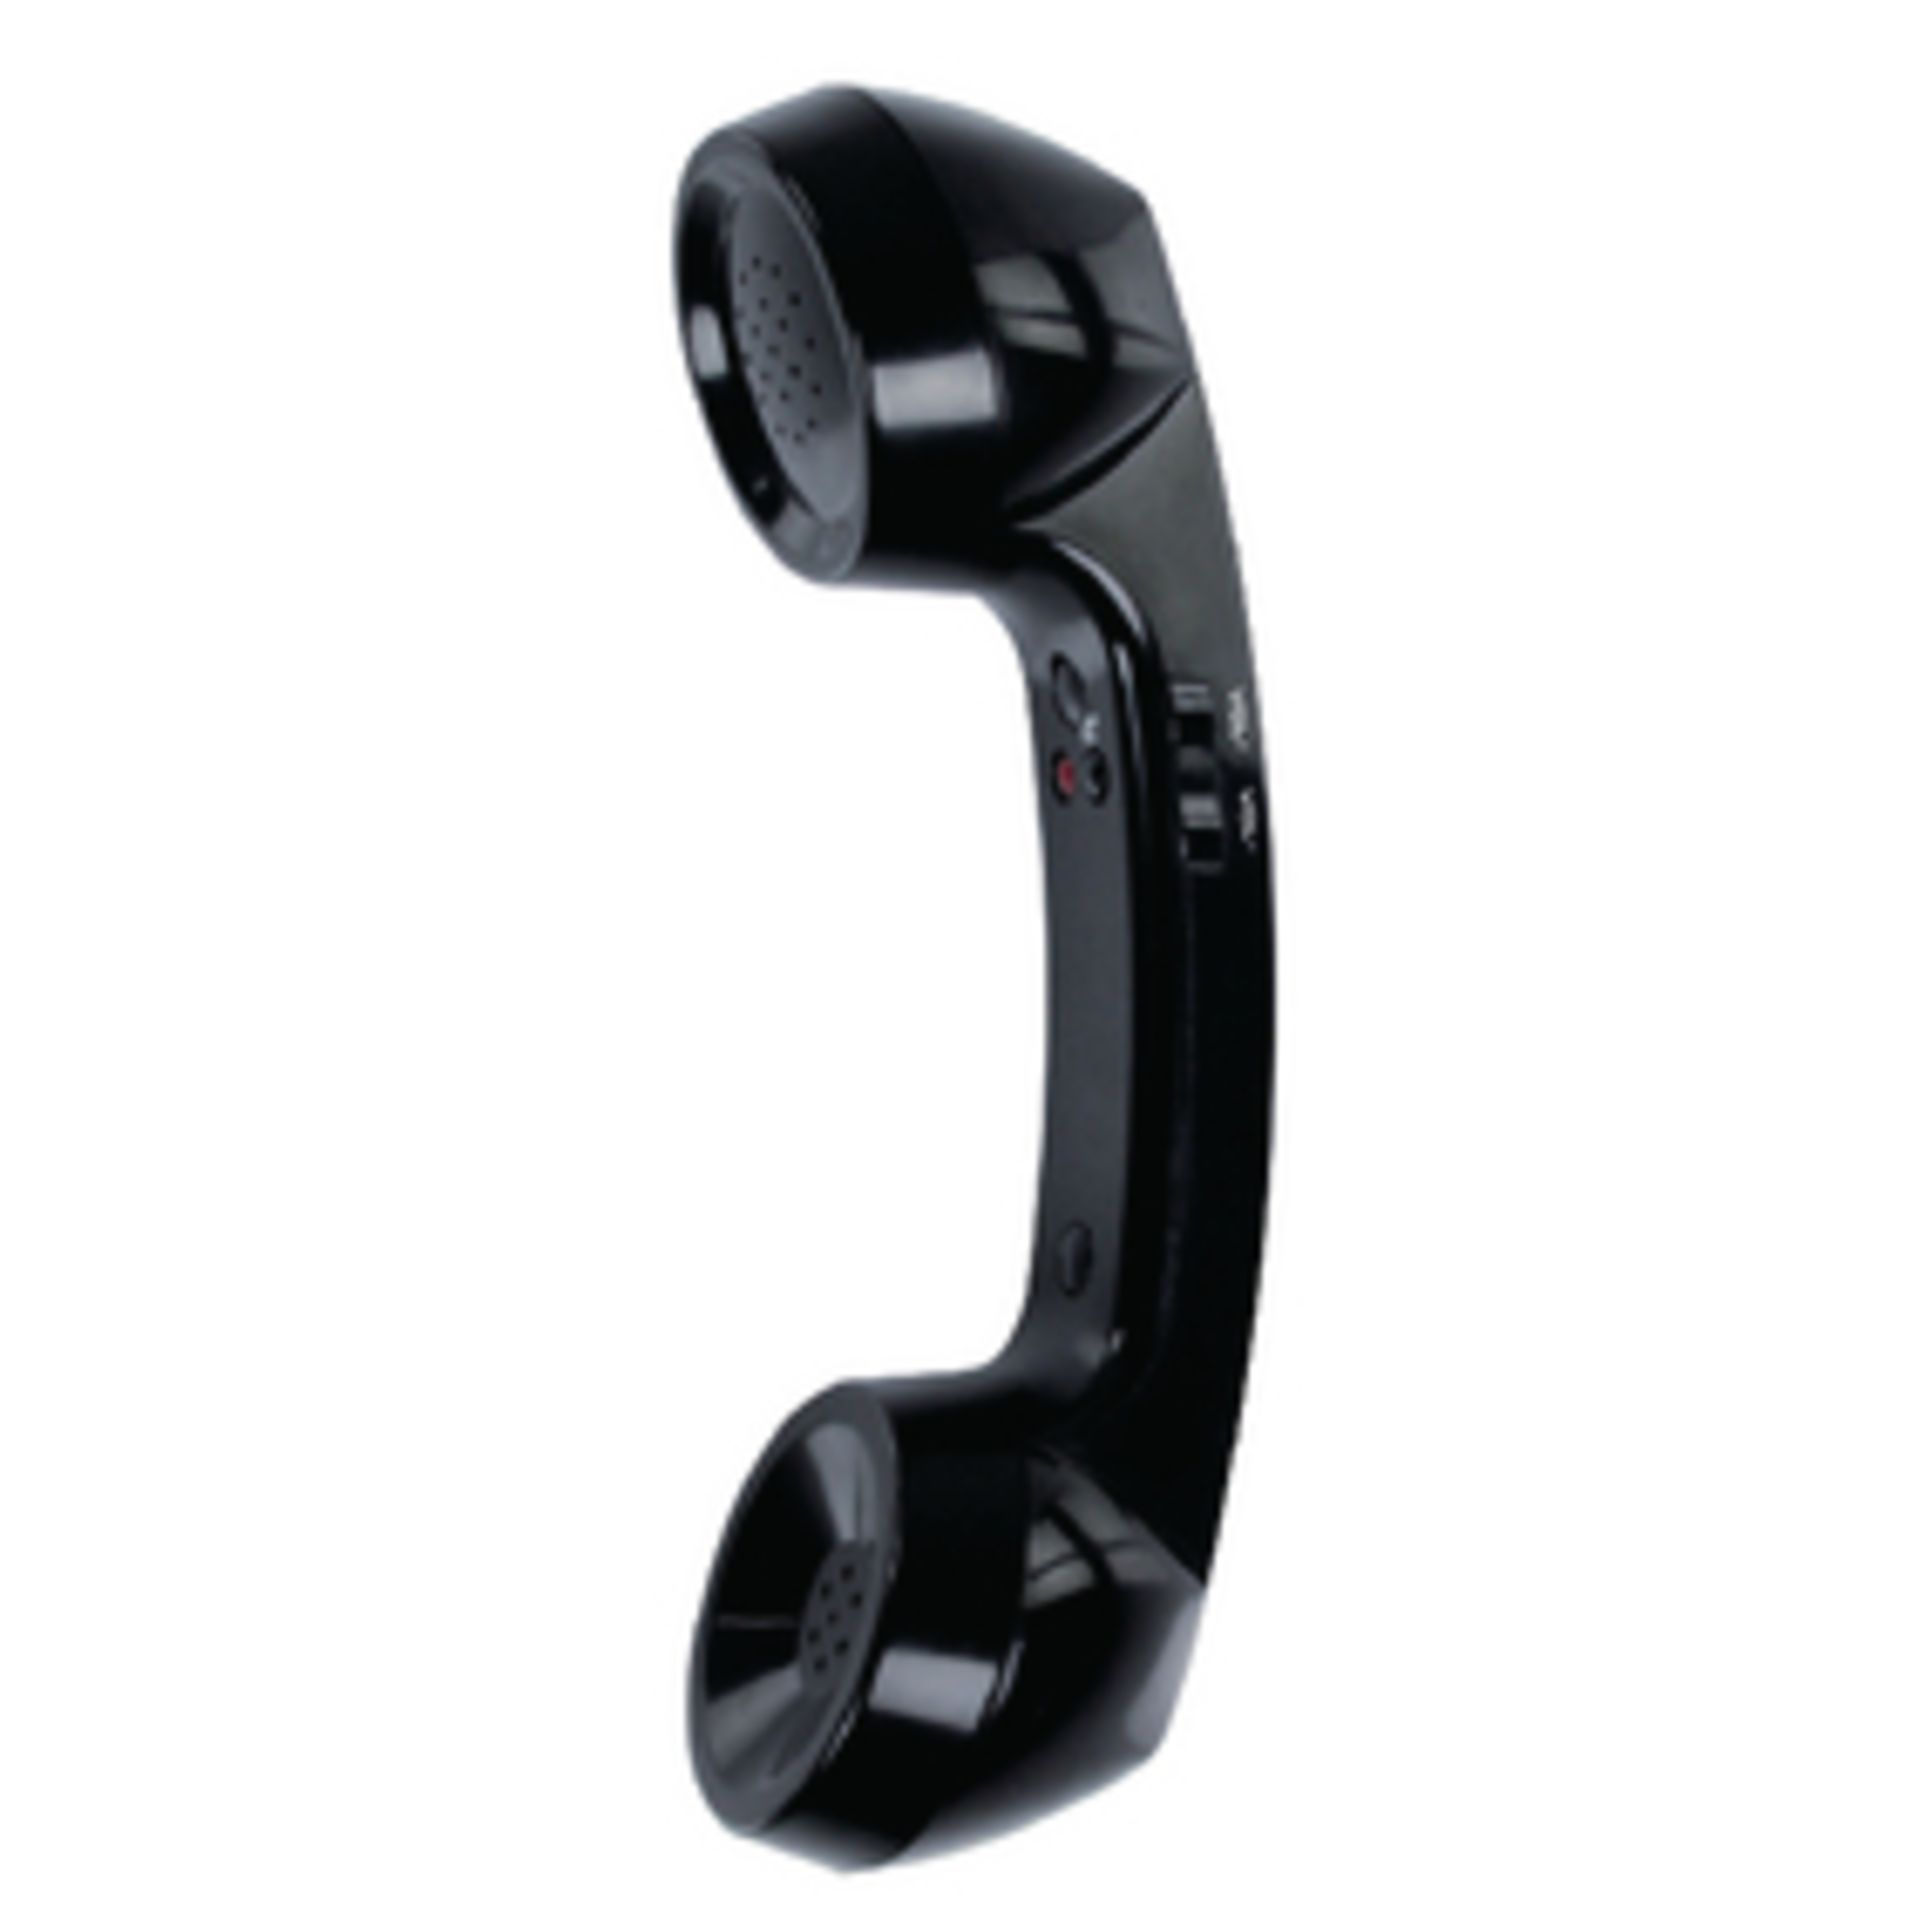 V *TRADE QTY* Brand New Bluetooth Retro Telephone Handset with Charging Cable RRP 19.99 X 8 YOUR BID